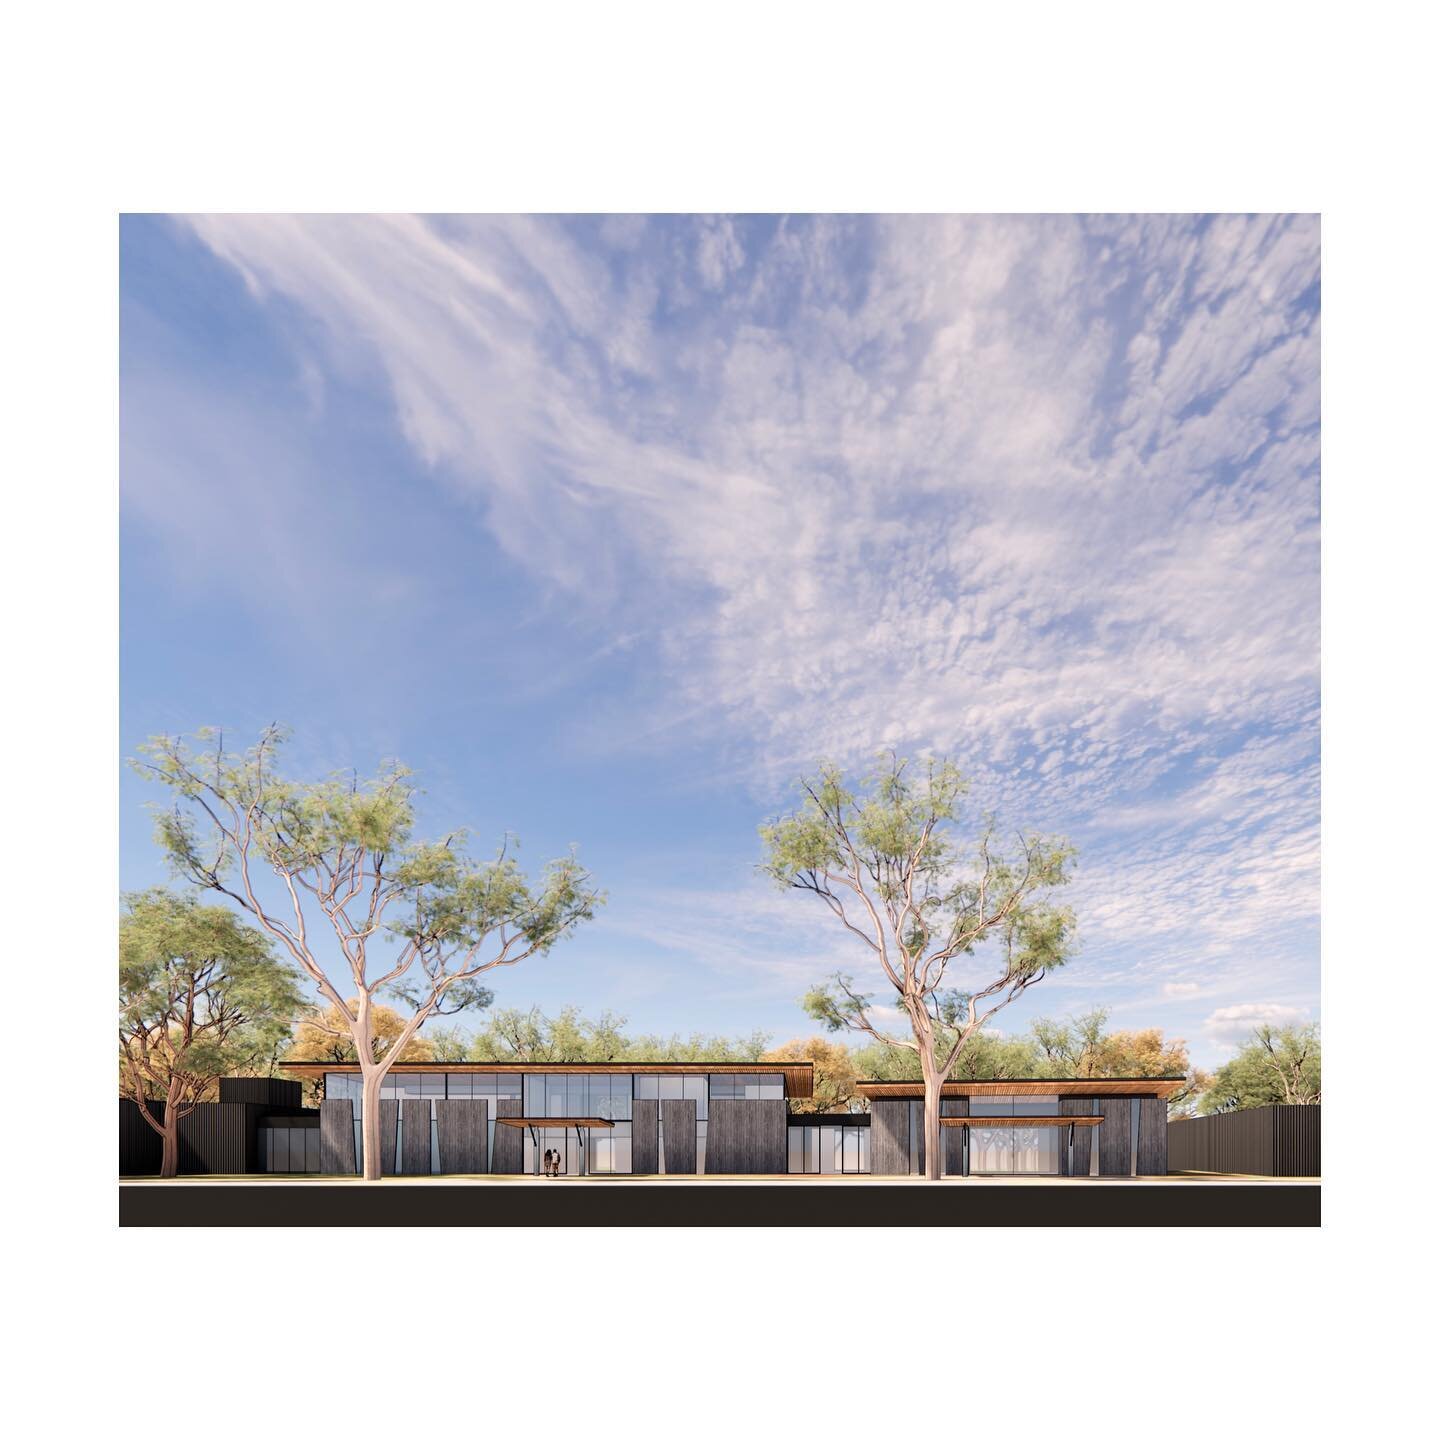 South Coast Funeral Home Concept.

#funerary #funeralarchitecture